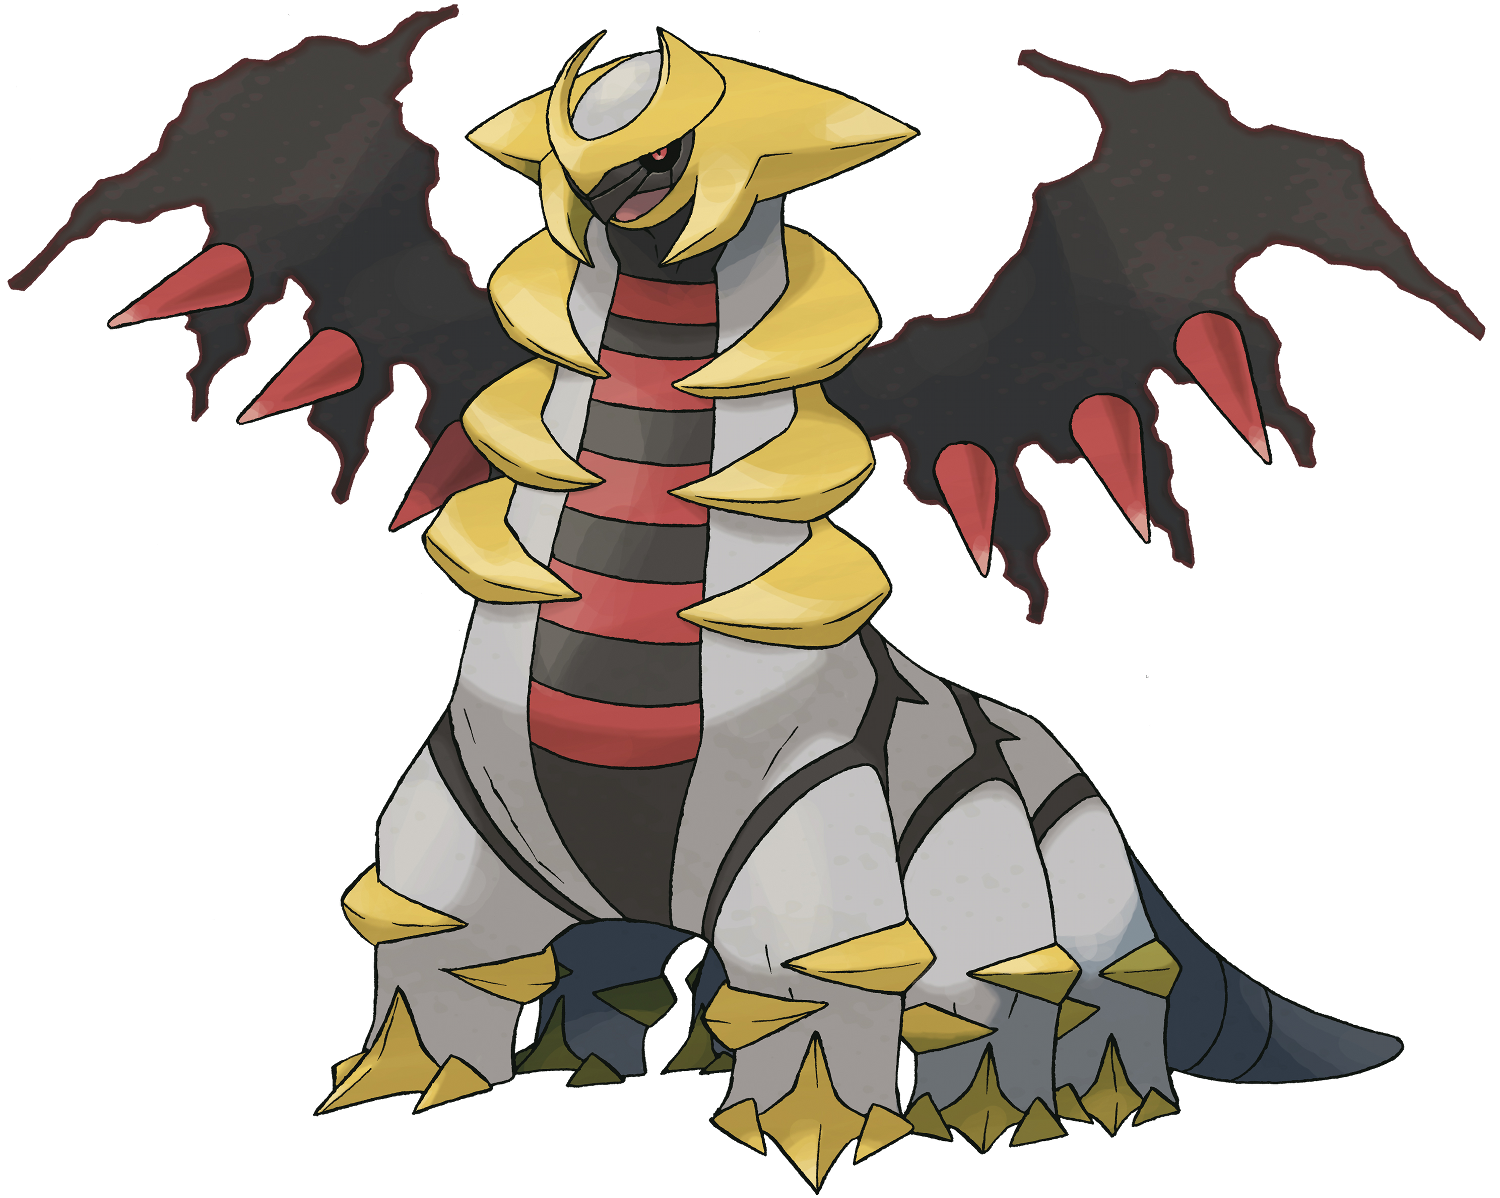 Wild Encounters (Giratina) (Normal/Shiny) – Pixel Package